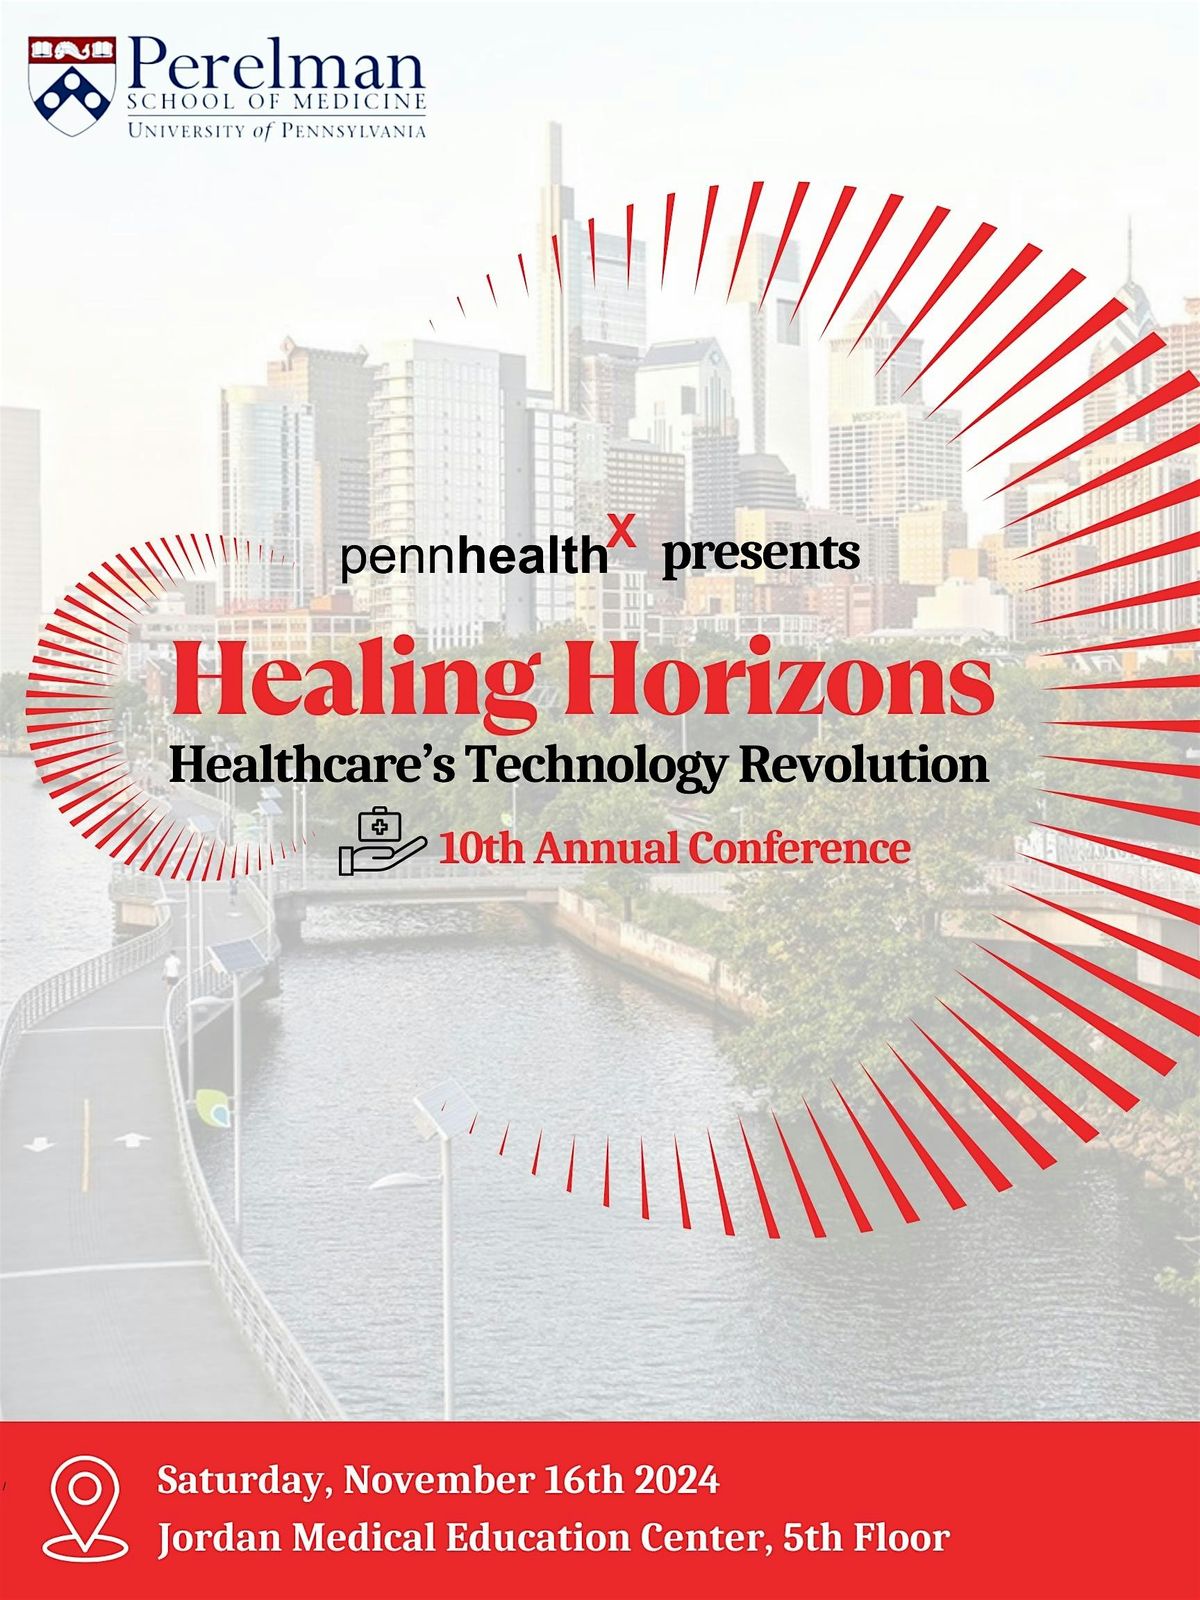 PennHealthX 2024 Conference: Healing Horizons